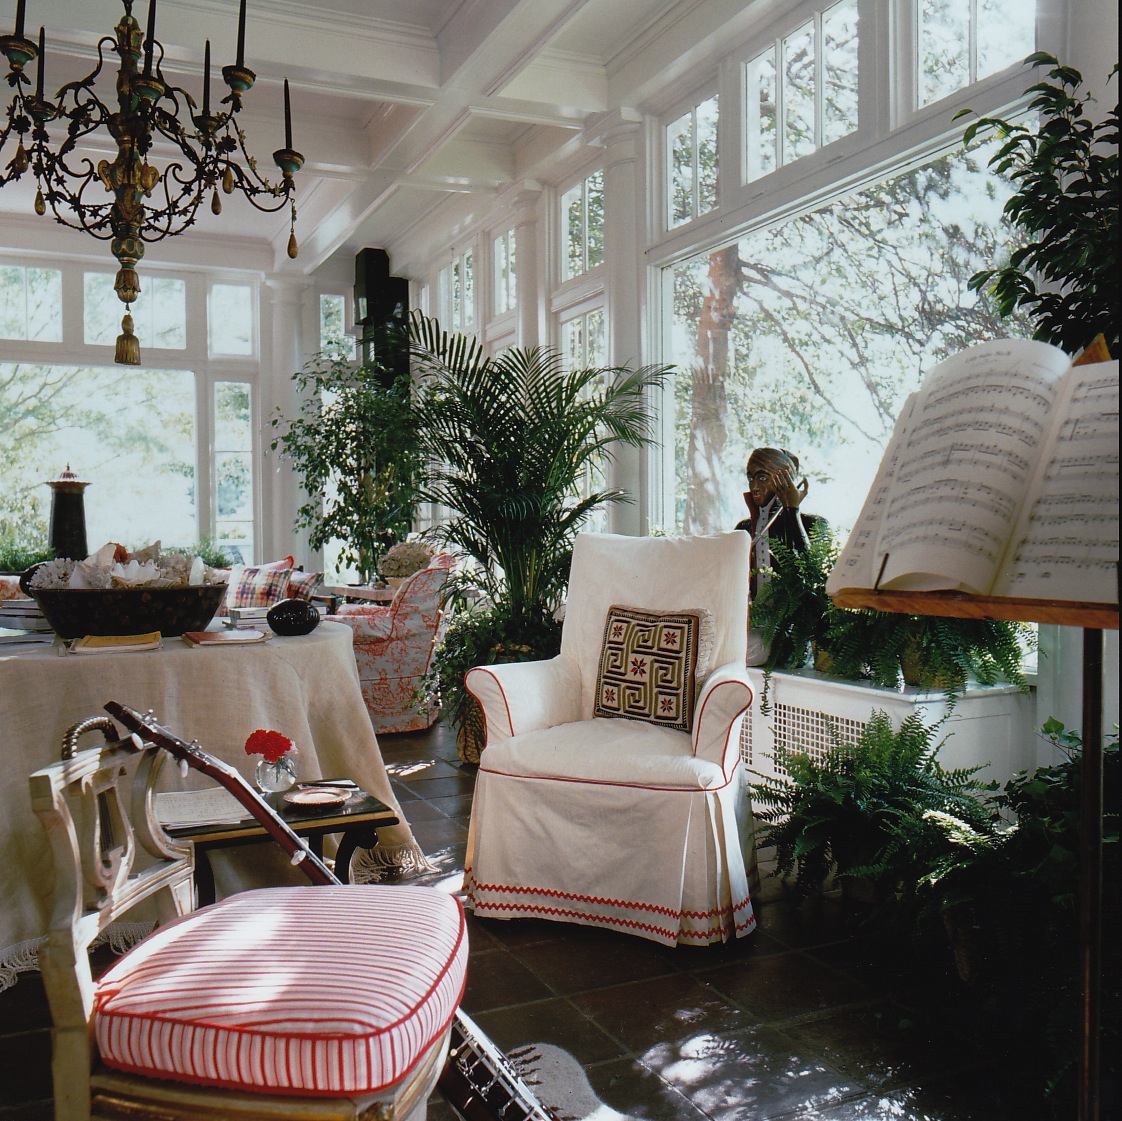 A beautifully appointed sunroom is filled with natural light from numerous windows. The space is enhanced with plants, furniture, and decorative accents.